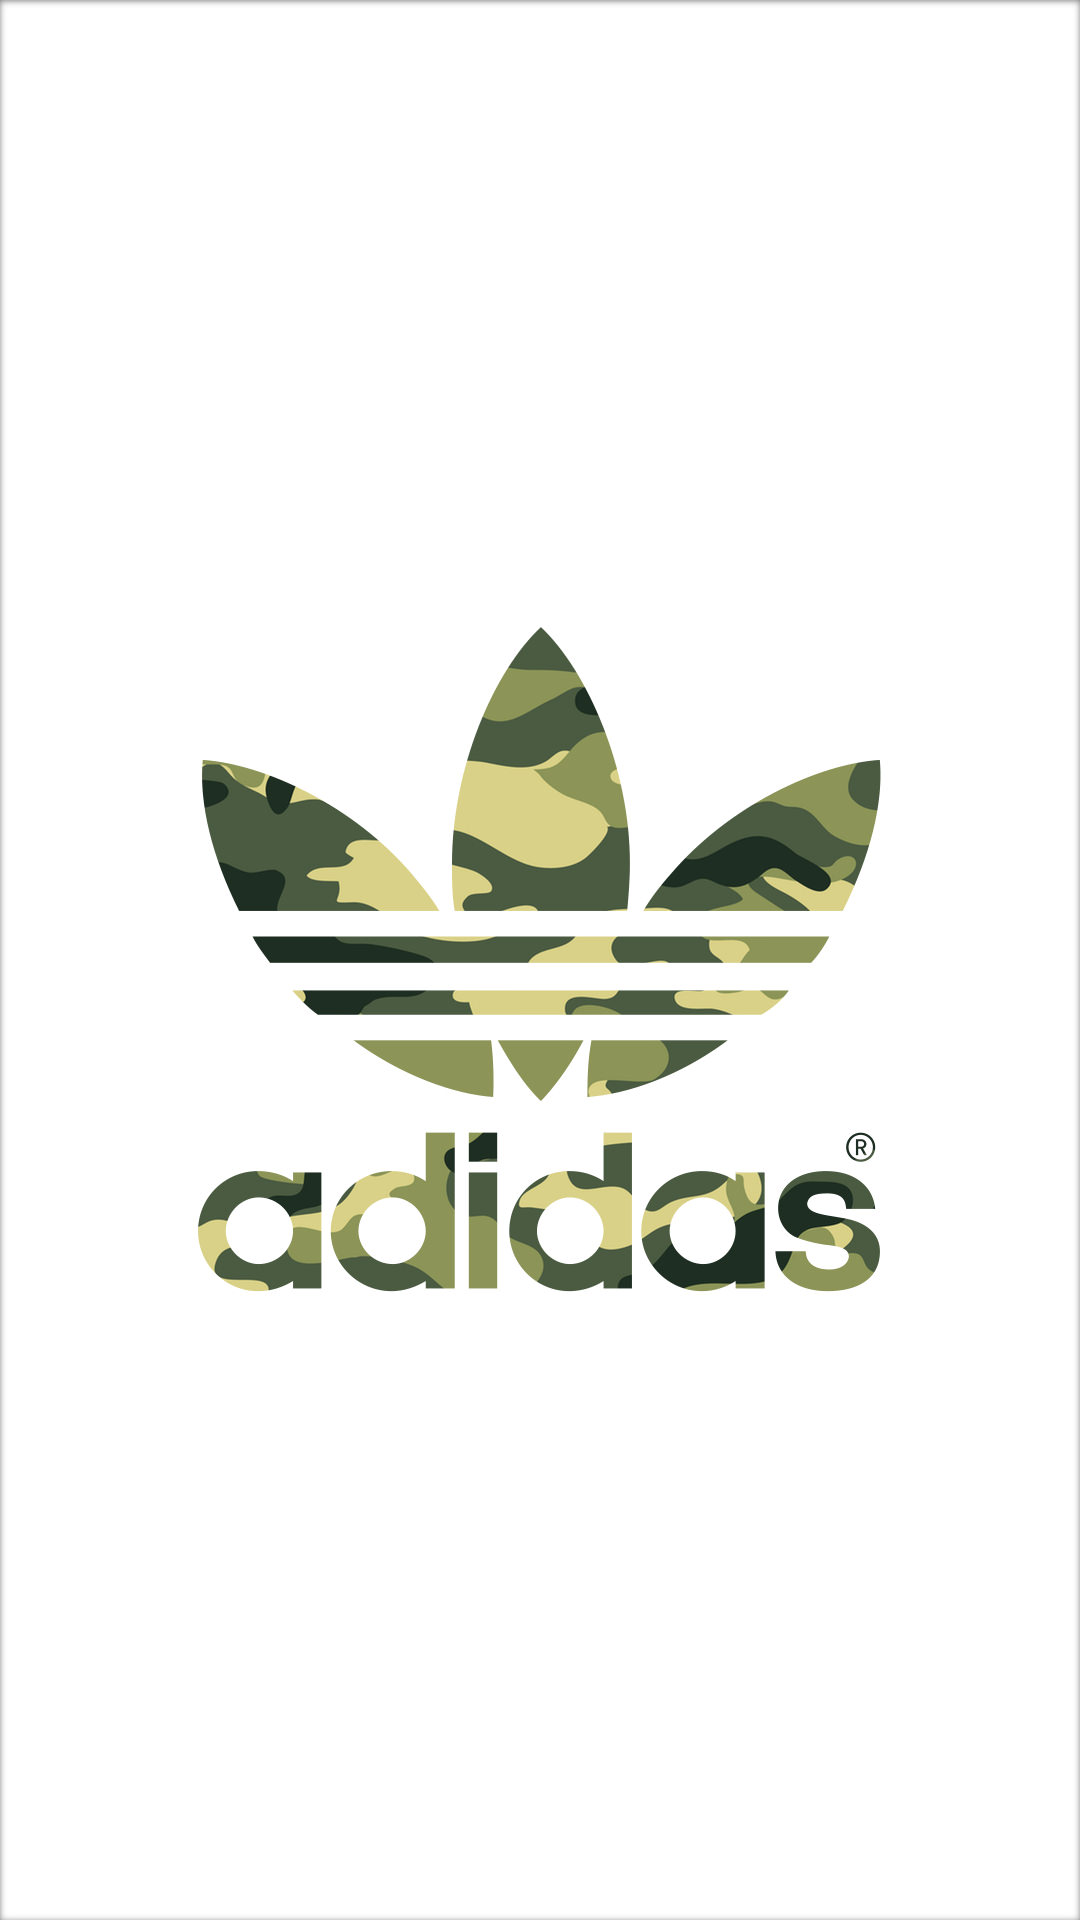 Free Download Adidas Logo1 Iphone Iphone 1080x19 For Your Desktop Mobile Tablet Explore 99 Adidas Logo Wallpaper 16 Adidas Logo Wallpaper 16 Adidas Wallpaper 16 Adidas 16 Wallpaper